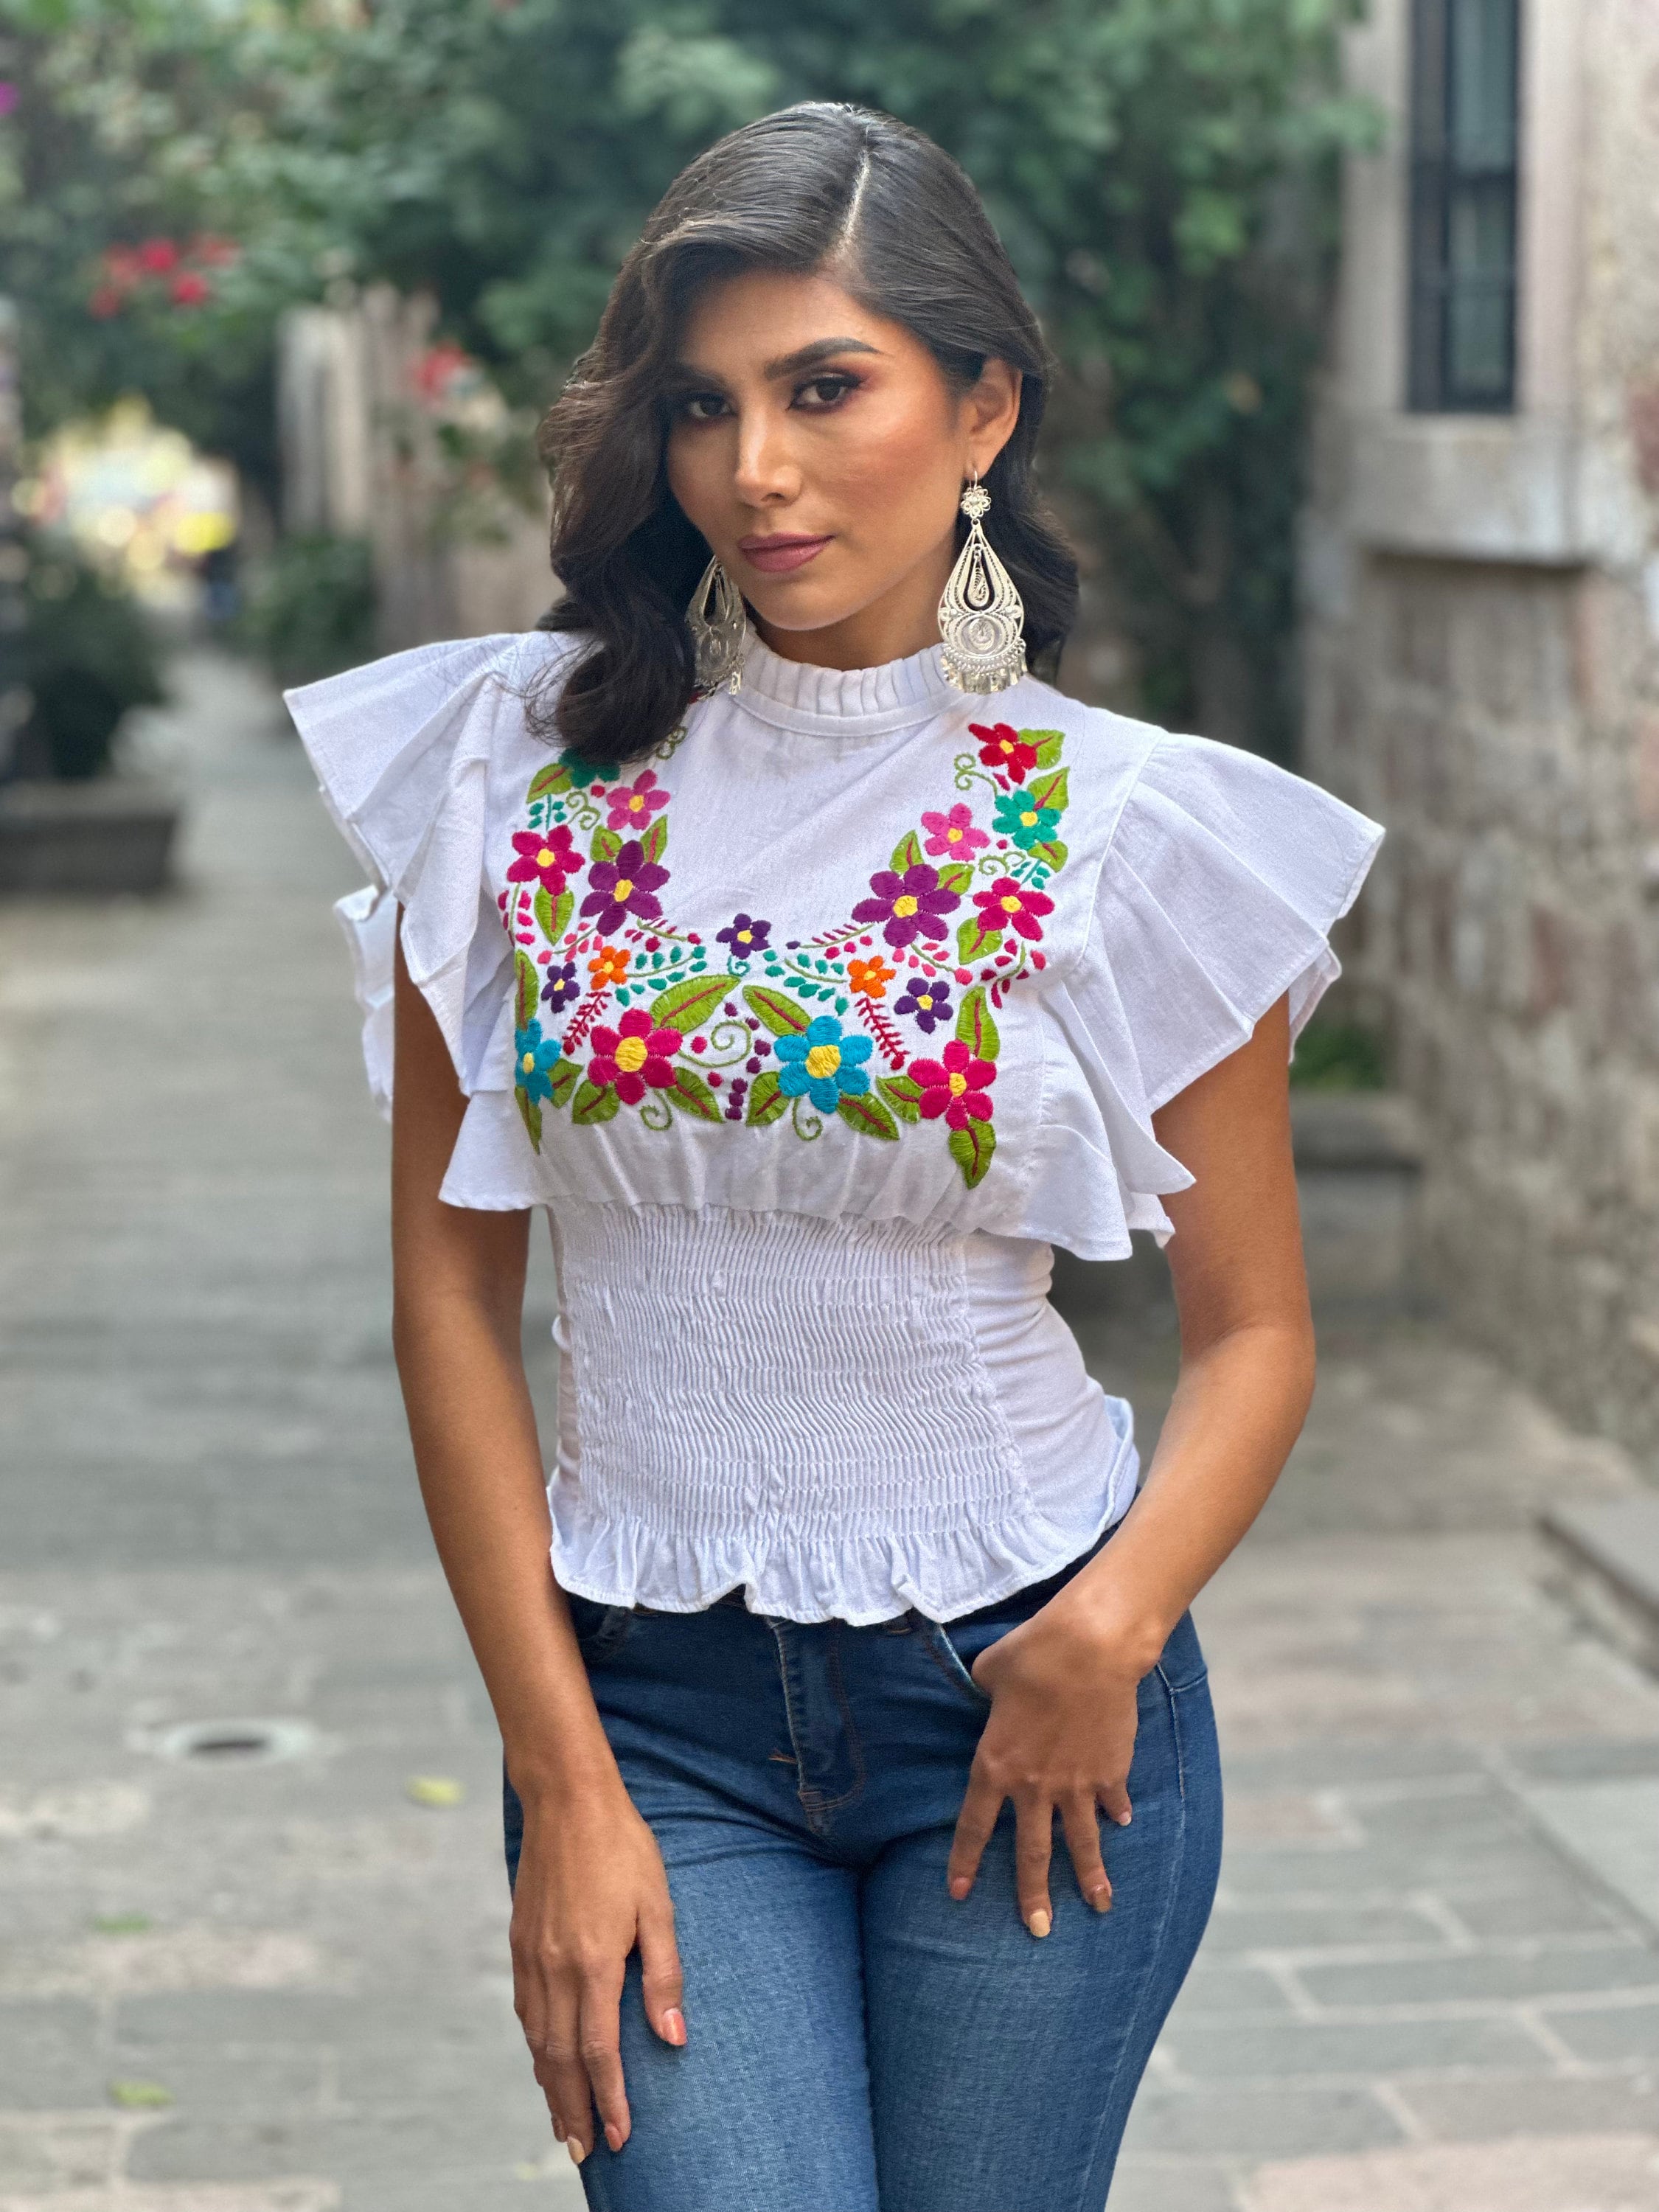 Floral Hand Embroidered Butterfly Sleeve Top. Mexican Embroidered Floral  Top. Mexican Artisanal Blouse. Typical Mexican Blouse. - Etsy Finland